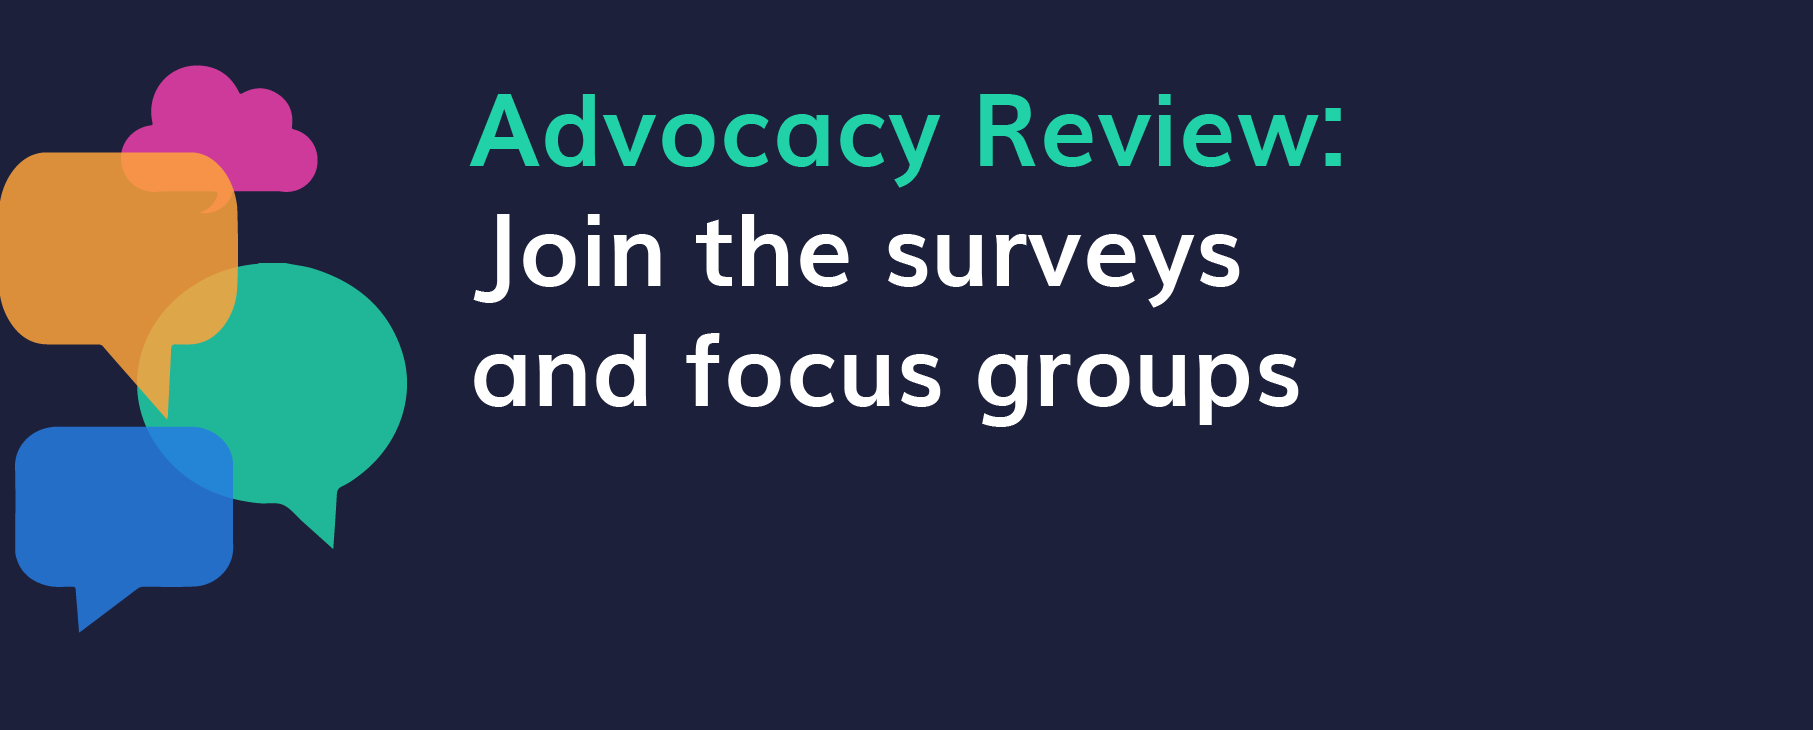 Advocacy Review 01